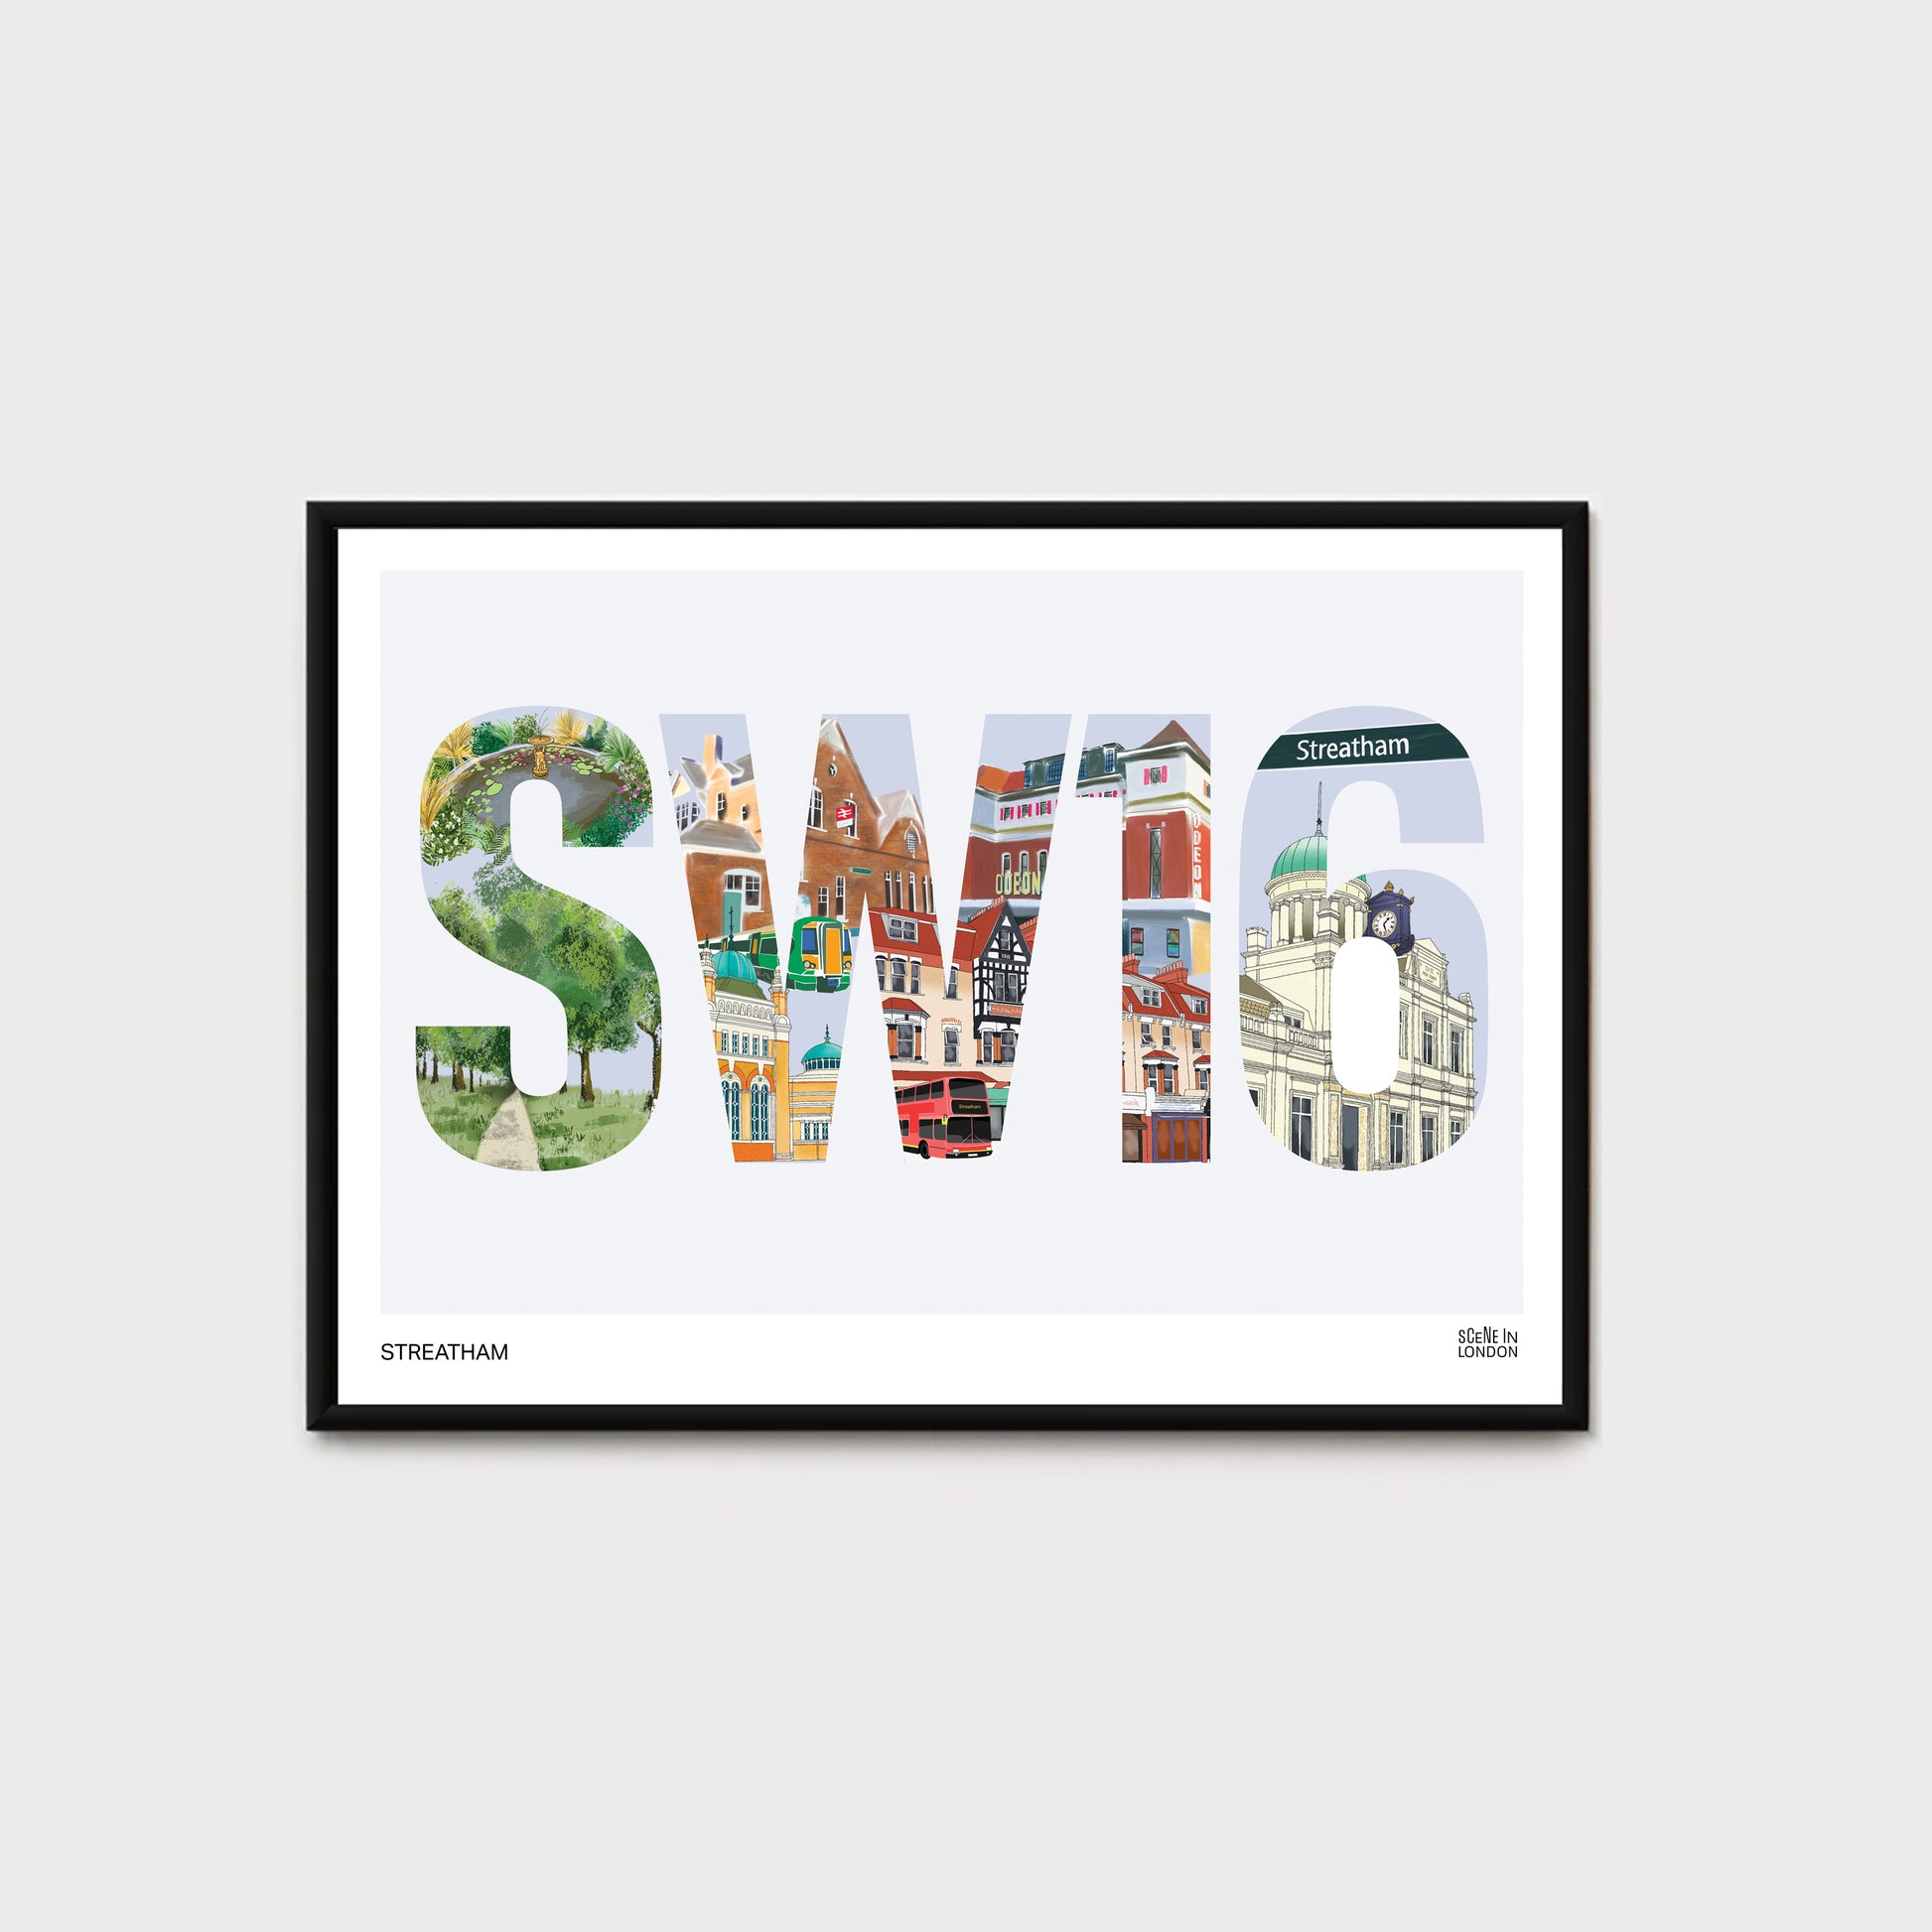 Streatham art print with places in SW16, London